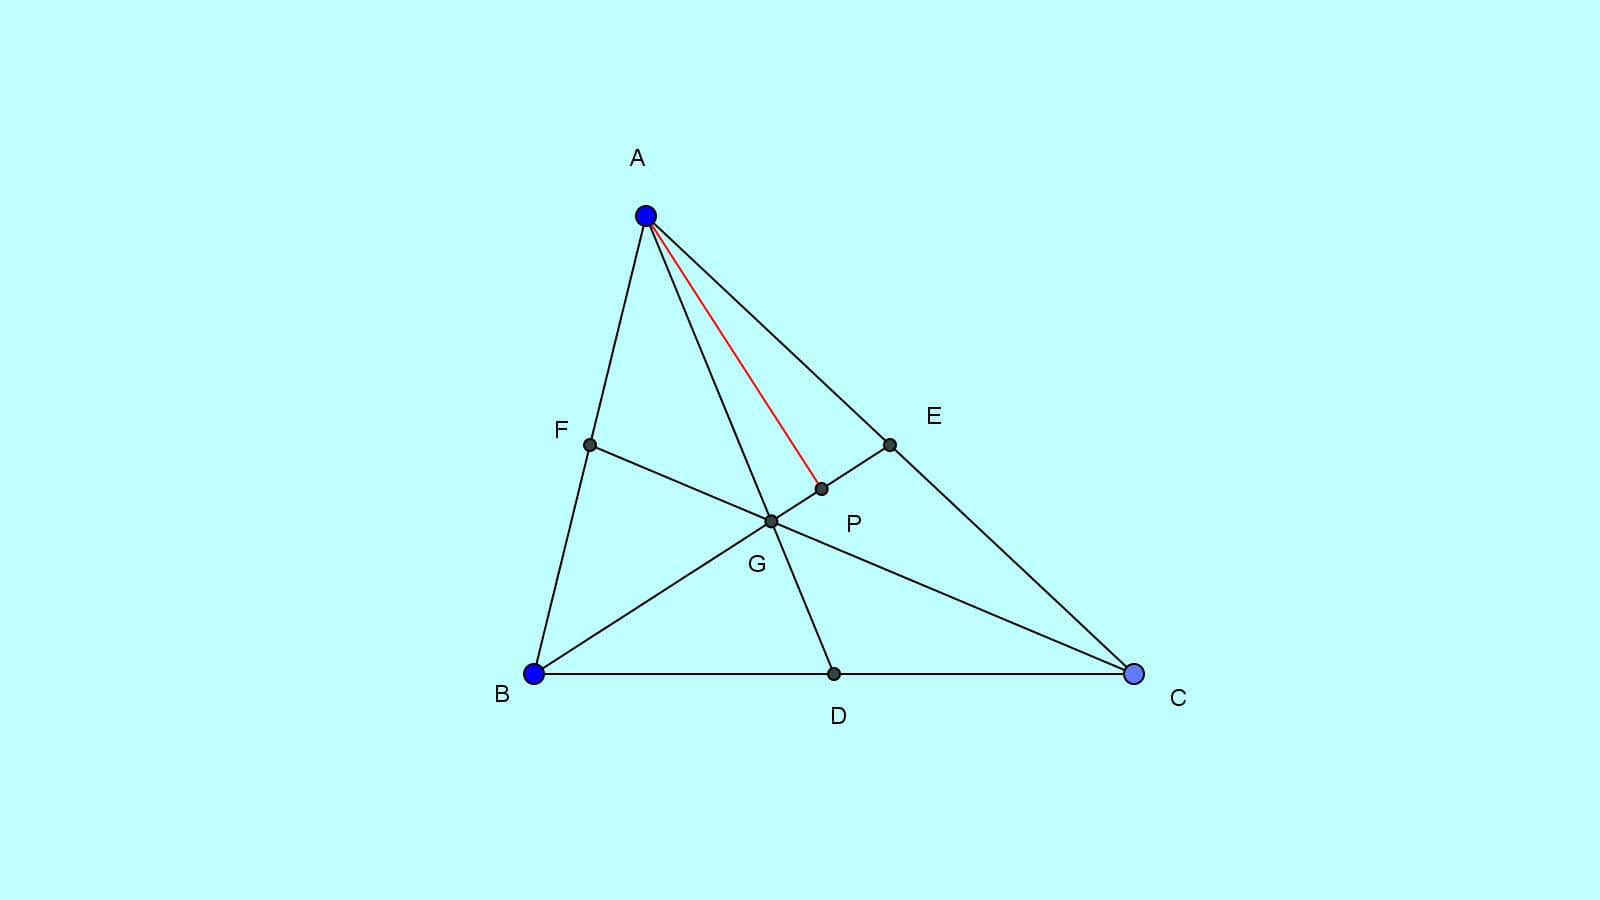 centroid divides triangle area into 3 or 6 equal parts